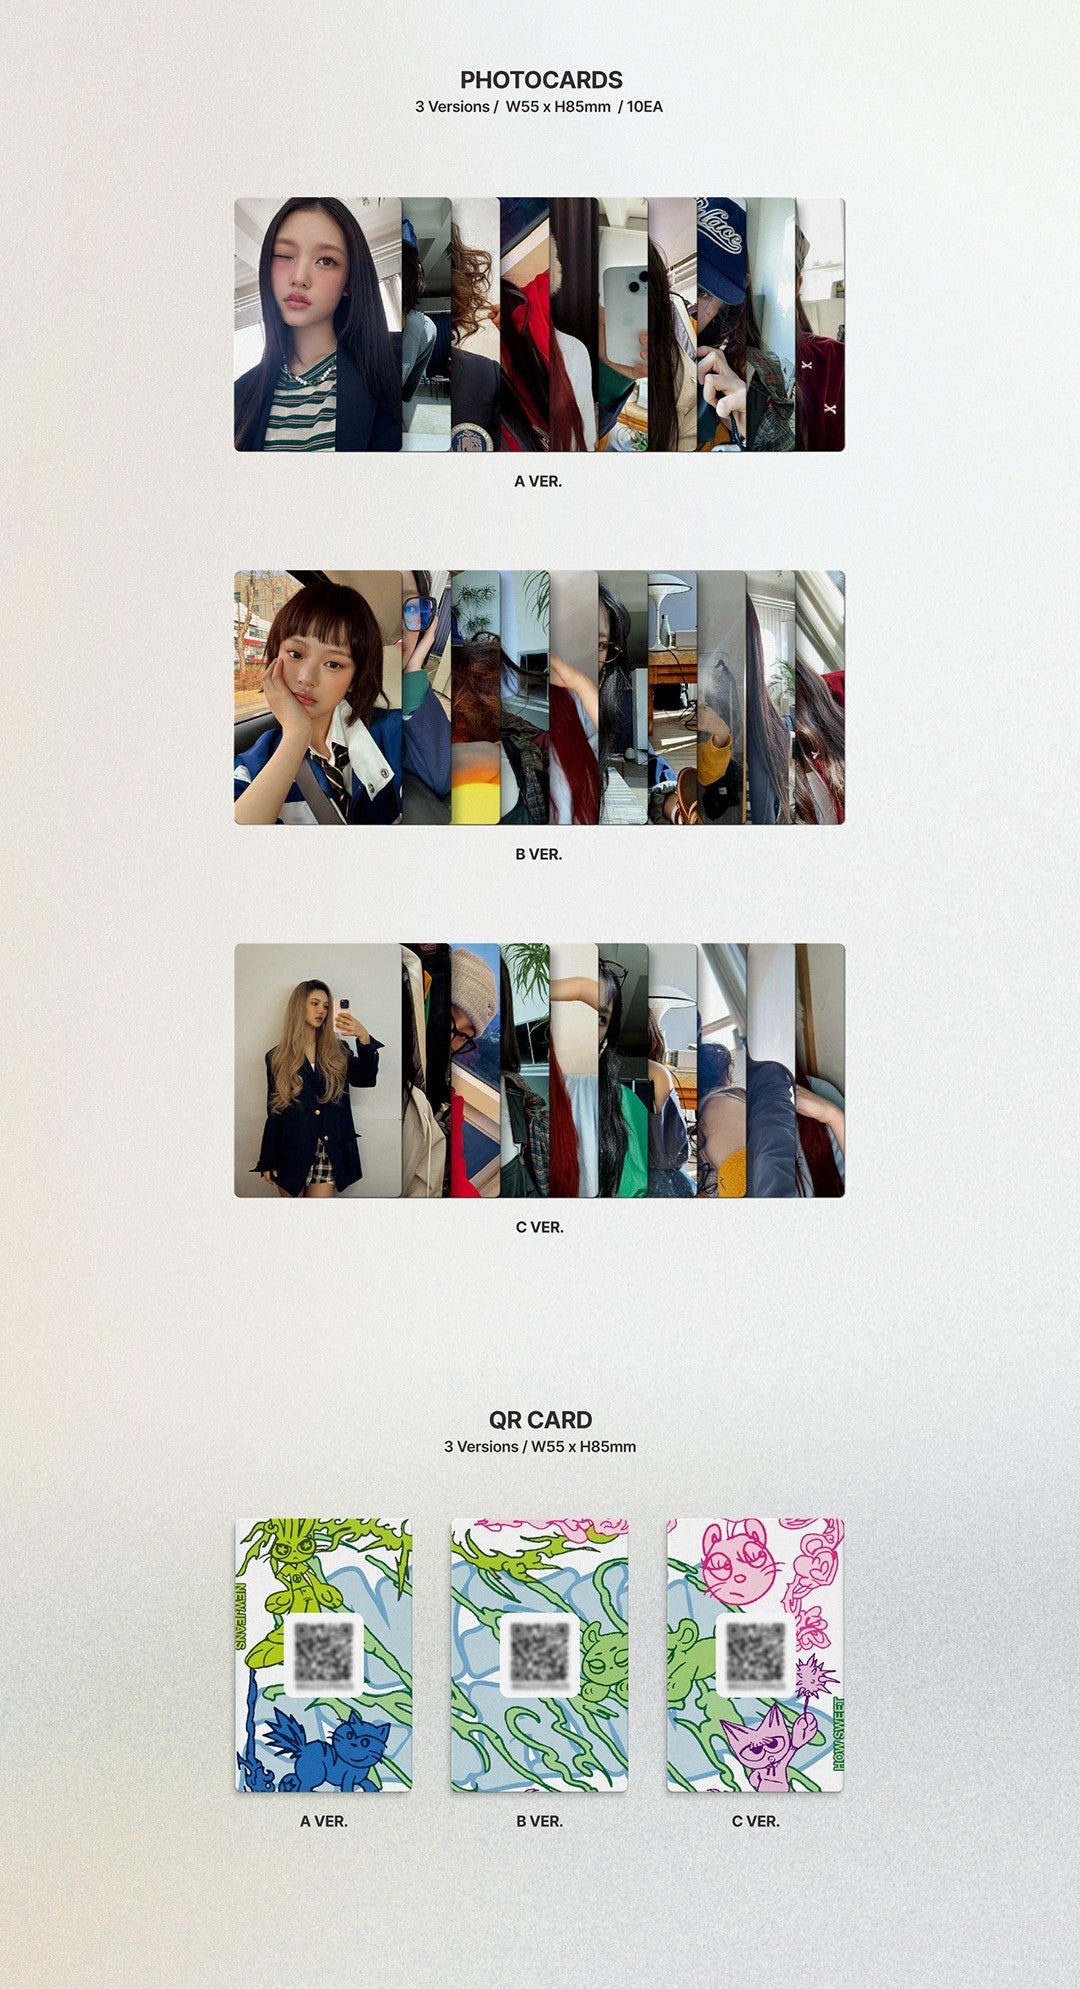 NewJeans 2nd Single Album How Sweet - Weverse Albums Version Inclusions: Photocard Set, QR Card